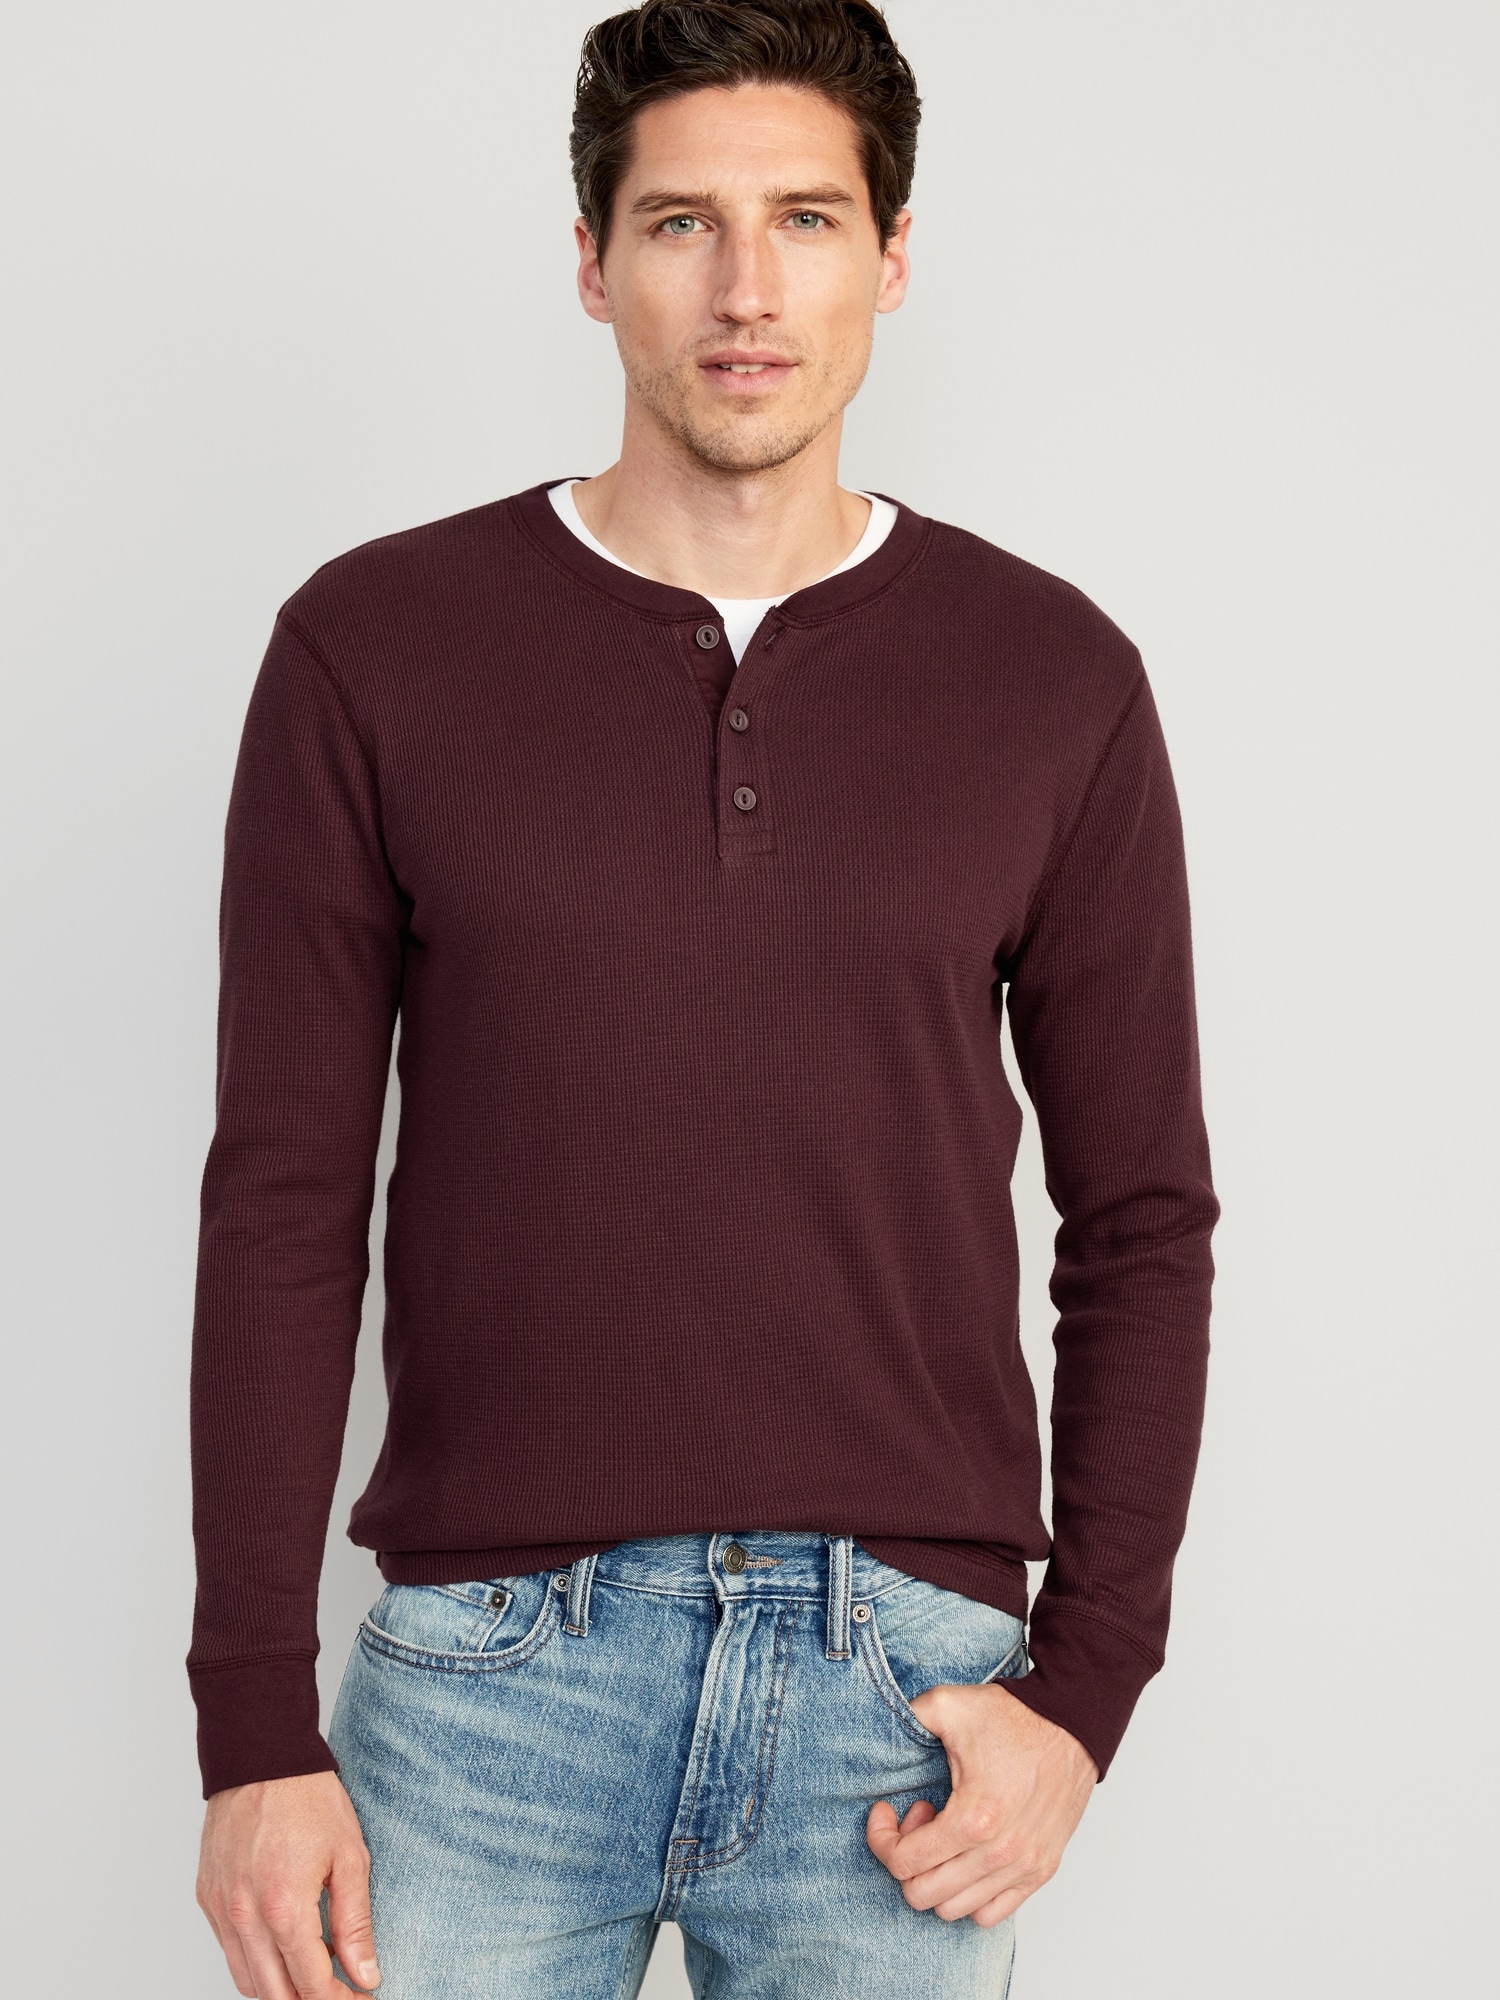 Old Navy Waffle-Knit Henley T-Shirt for Men